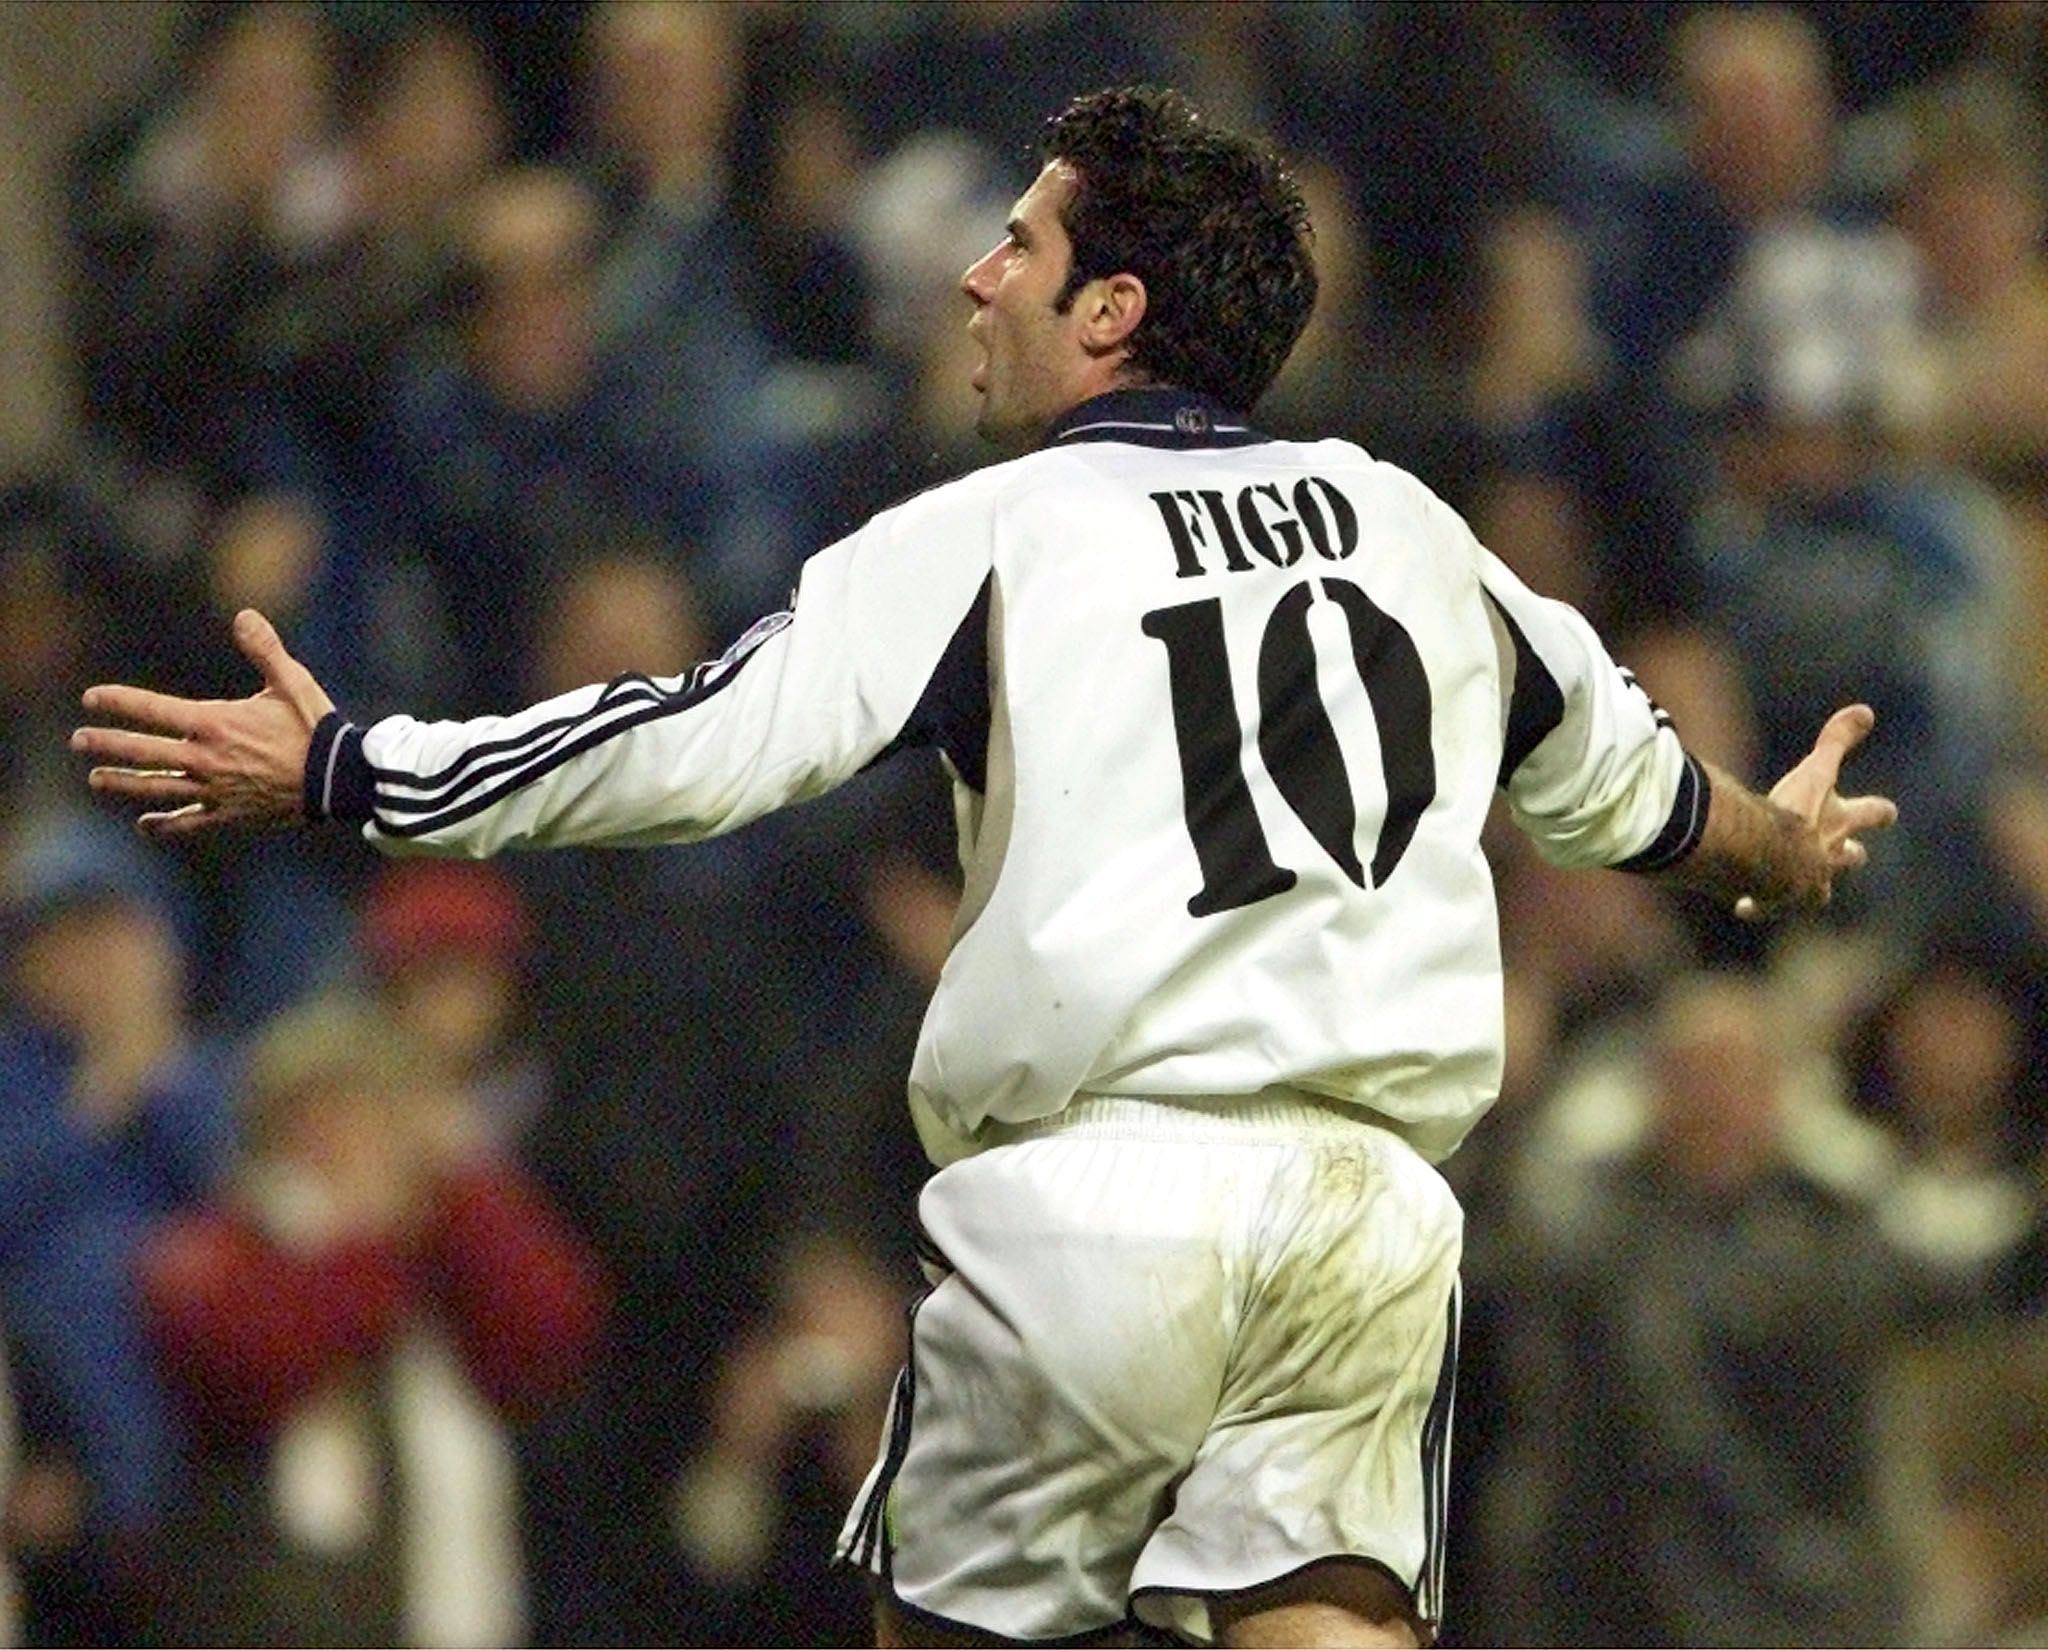 Real Madrid's Portuguese star Luis Figo celebrates after scoring a penalty against Anderlecht's during his Champions League group D soccer match at Santiago Bernabeu stadium December 5, 2000.

SP